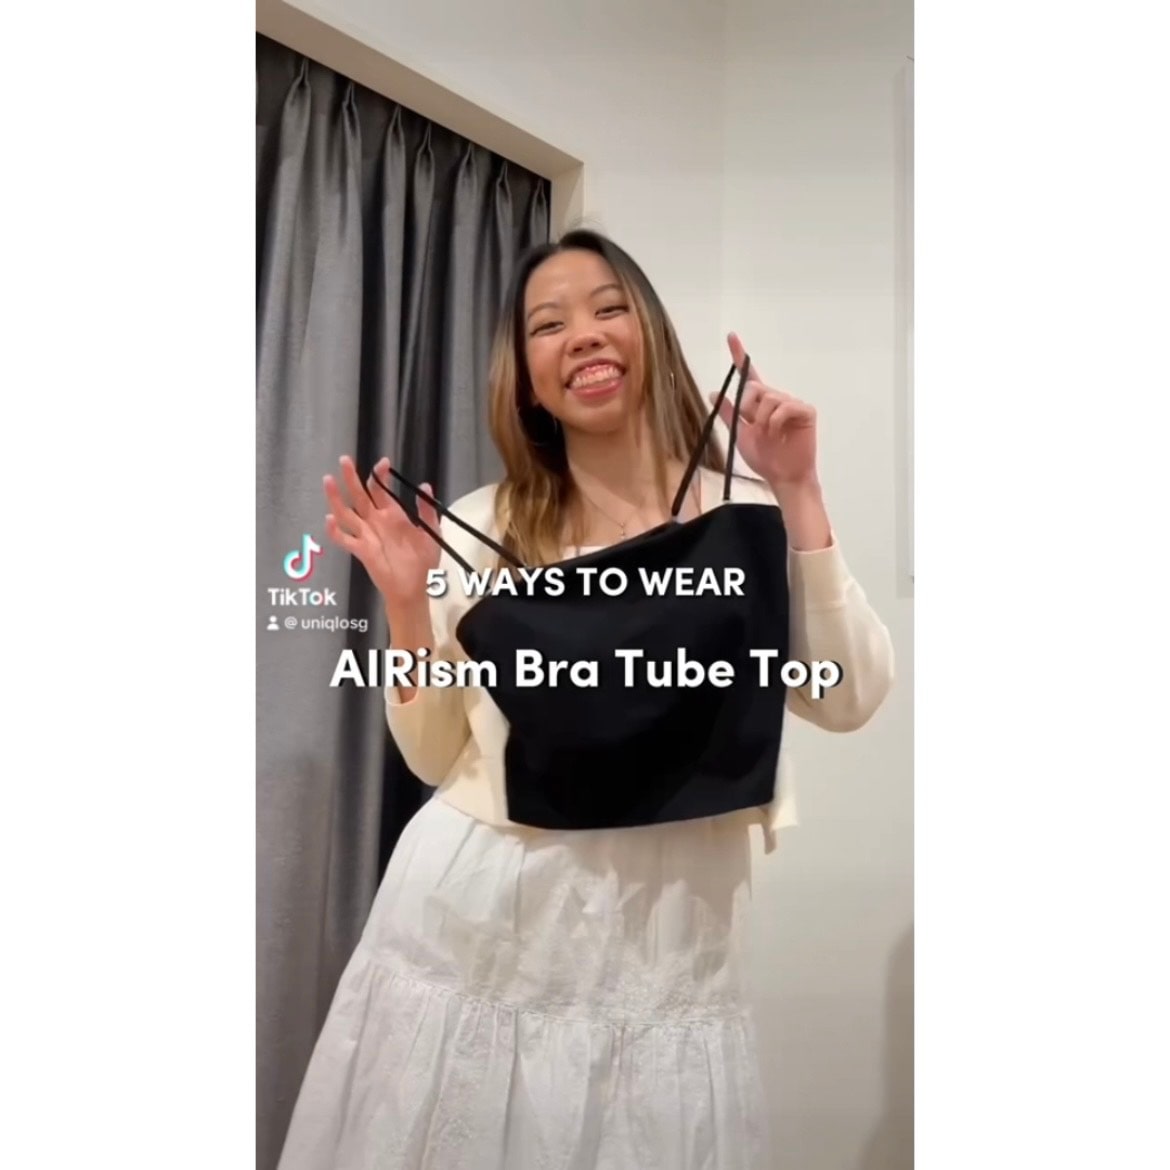 How to Wear a Tube Top